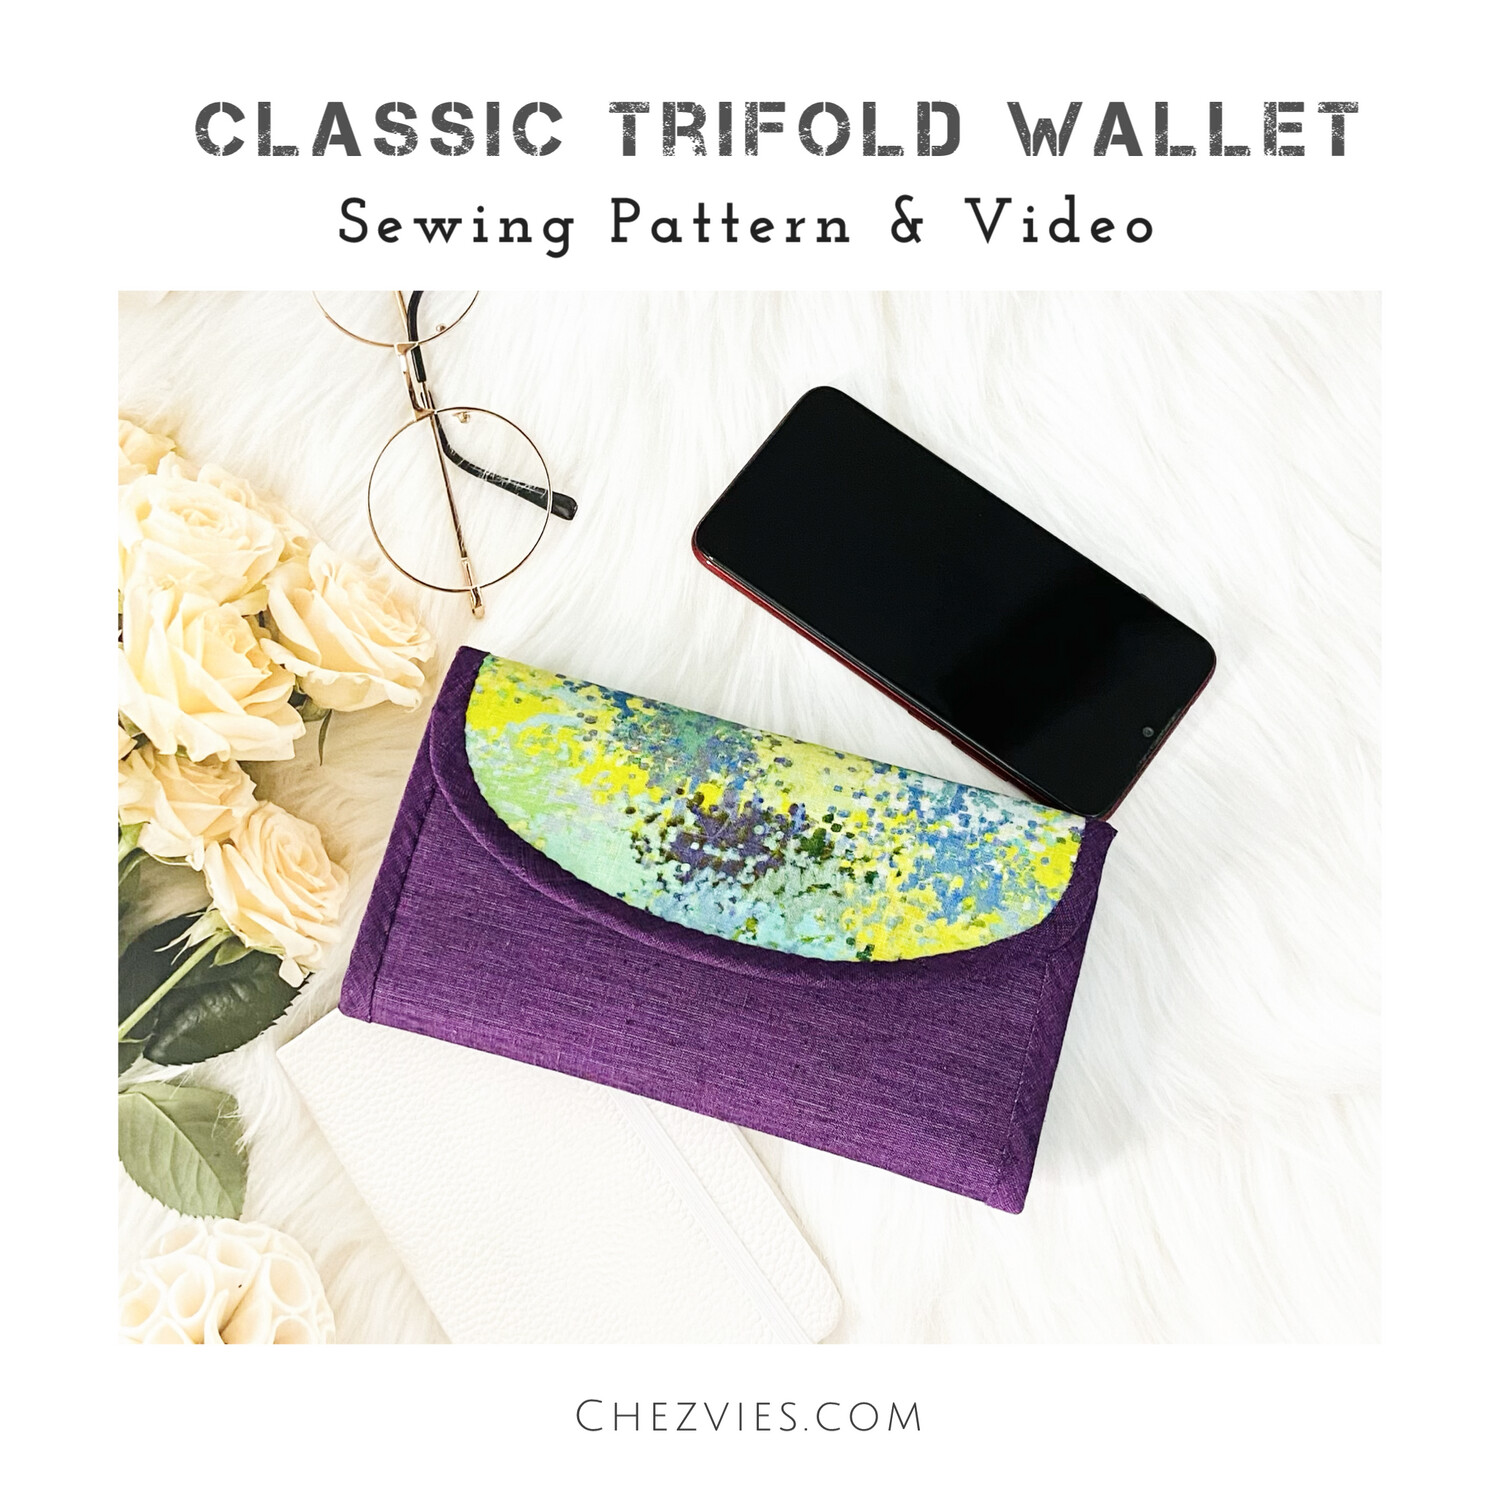 Classic Trifold Wallet PdF Sewing Pattern - Fabric Wallet - Full Templates and Video Tutorial